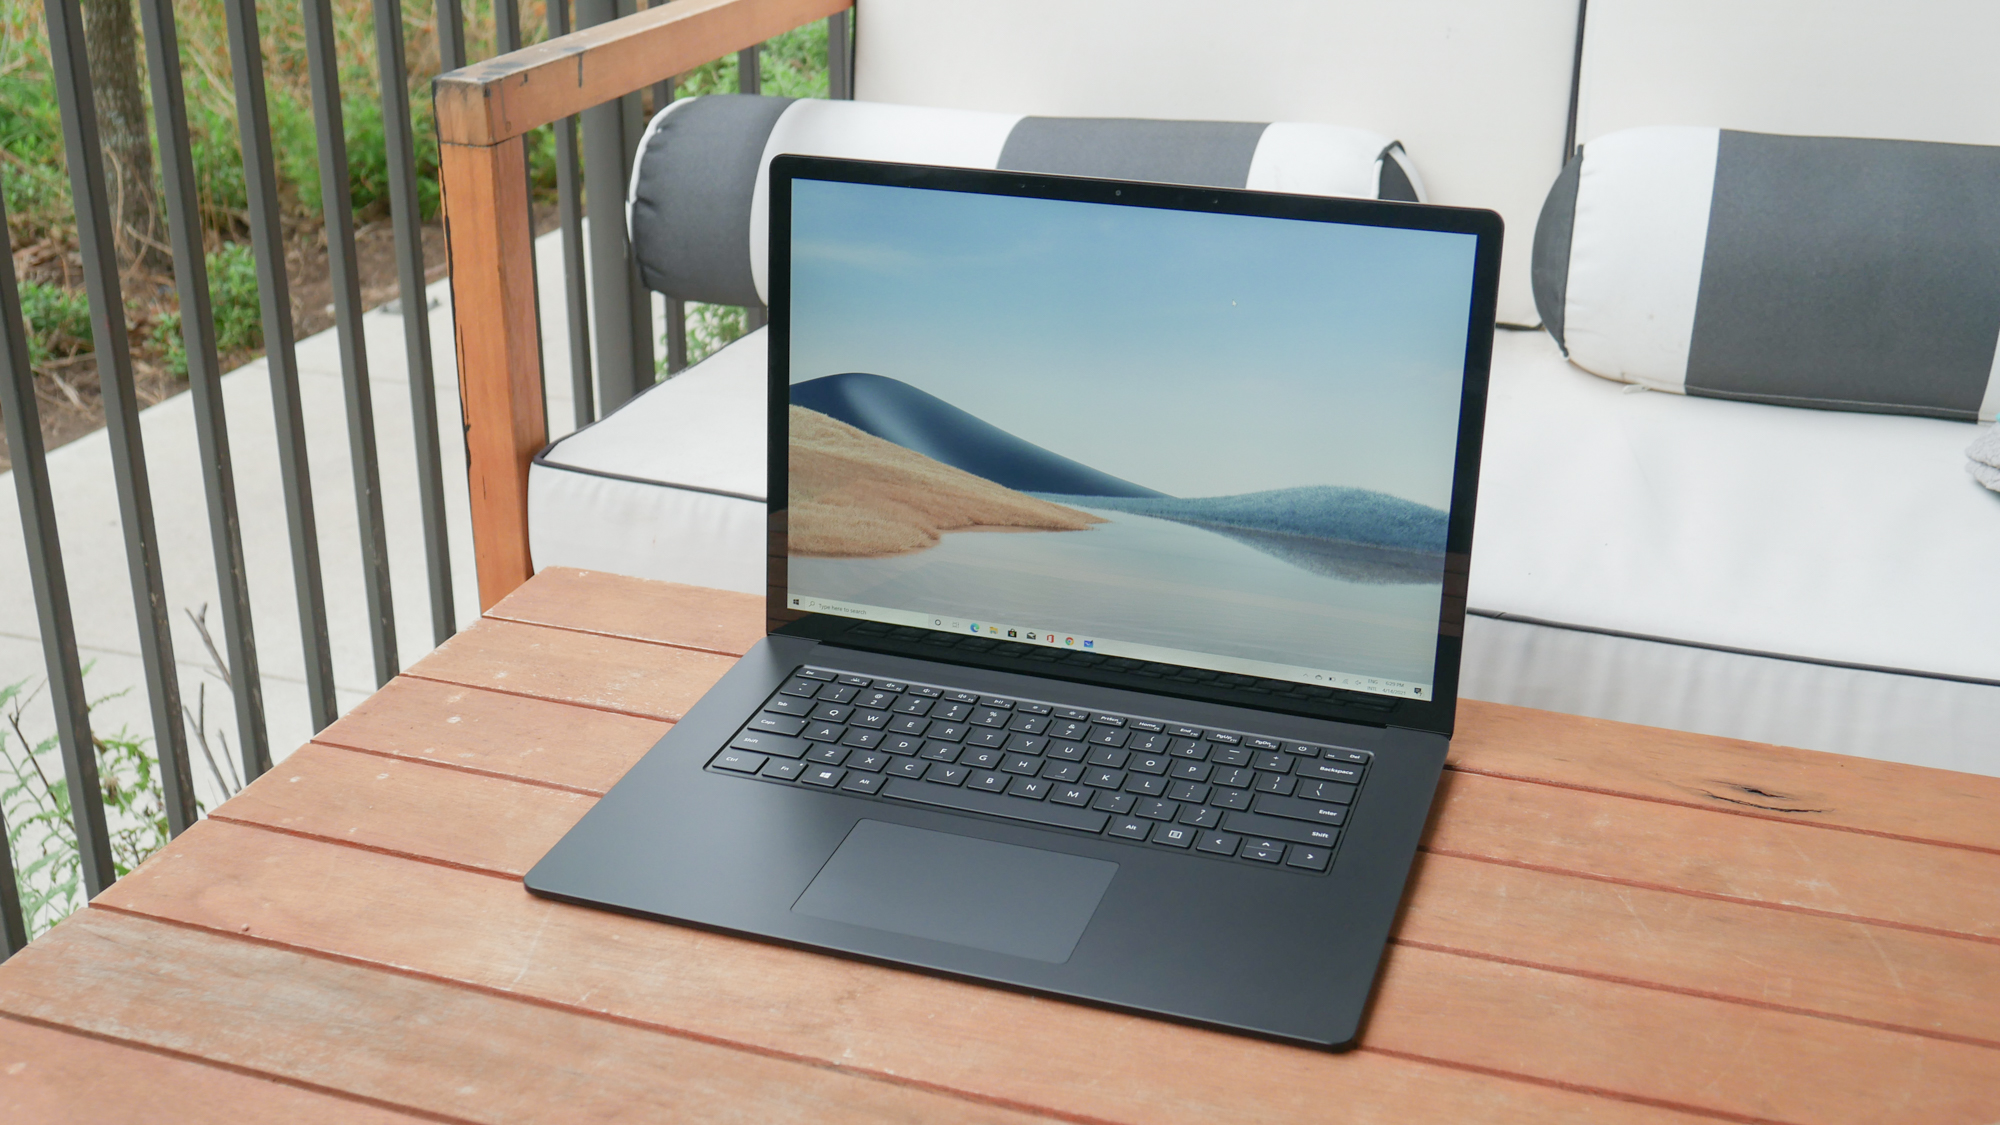 Microsoft Surface Laptop 4 (15-inch) on an outdoor wooden table